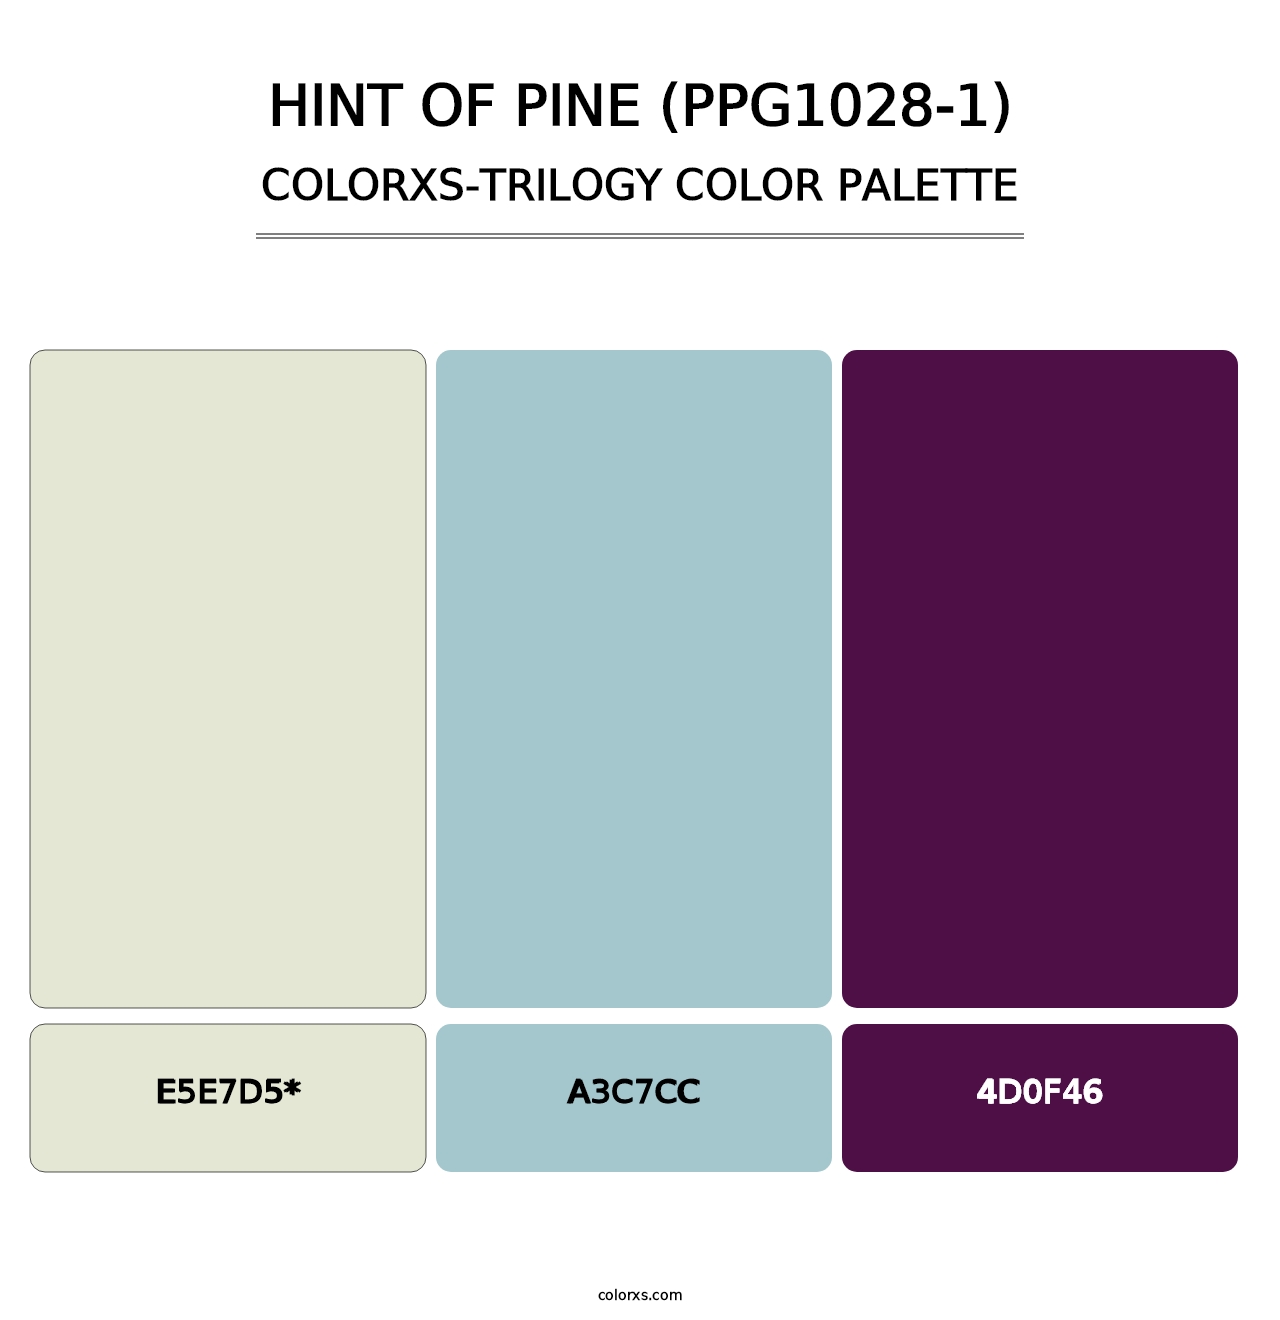 Hint Of Pine (PPG1028-1) - Colorxs Trilogy Palette